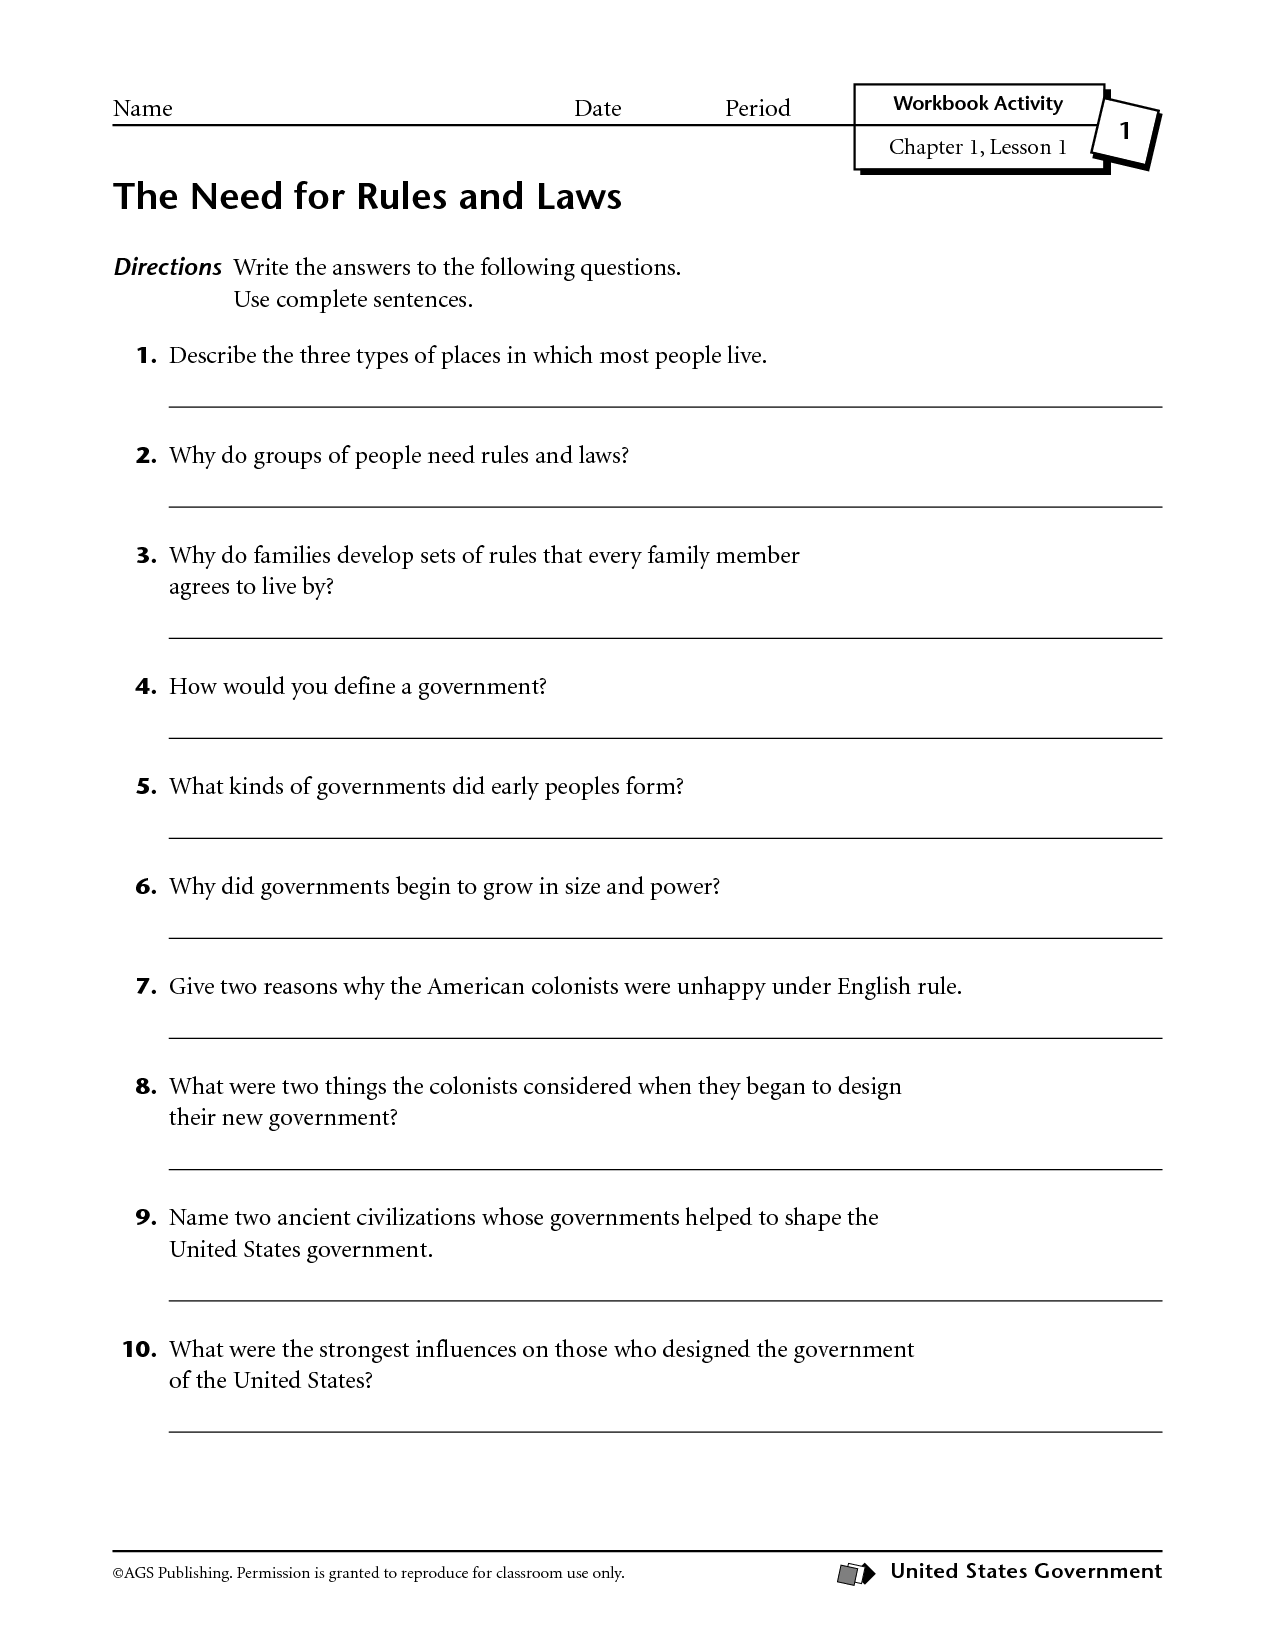 American Government Chapter 4 Section 1 Worksheet Answers Image